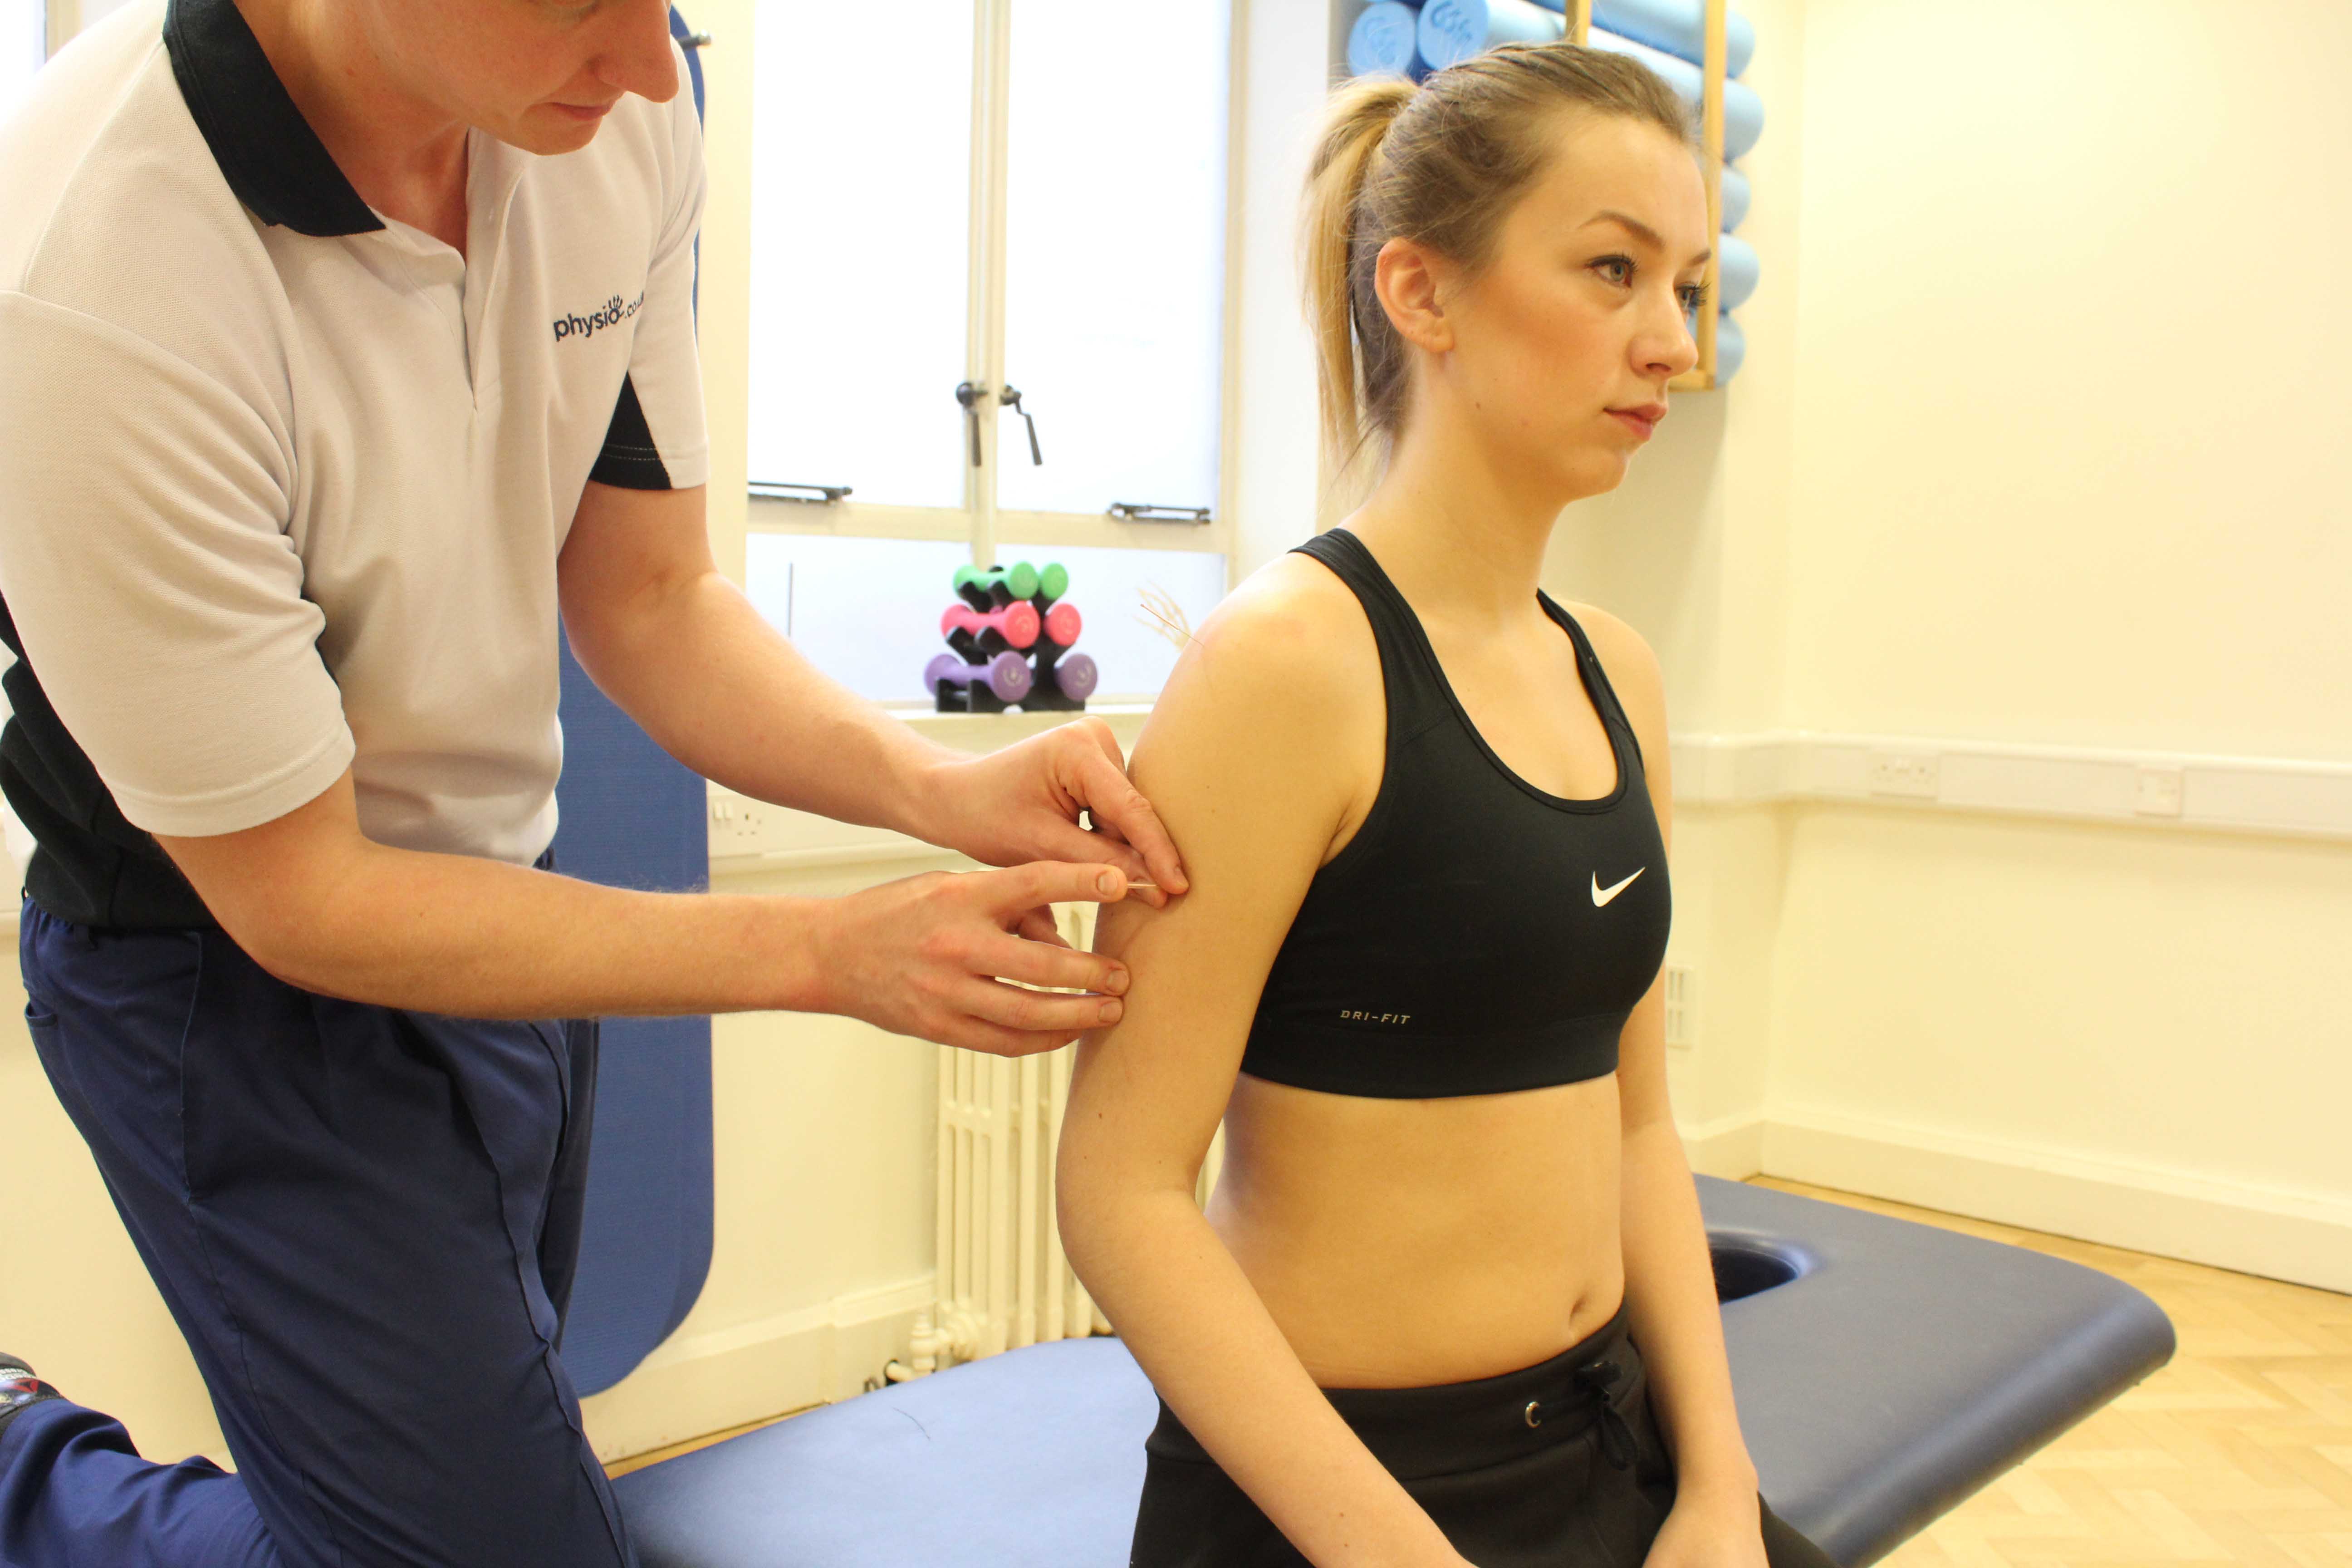 Specilaist physiotherapist using accupuncture to alleviate pain and stiffness